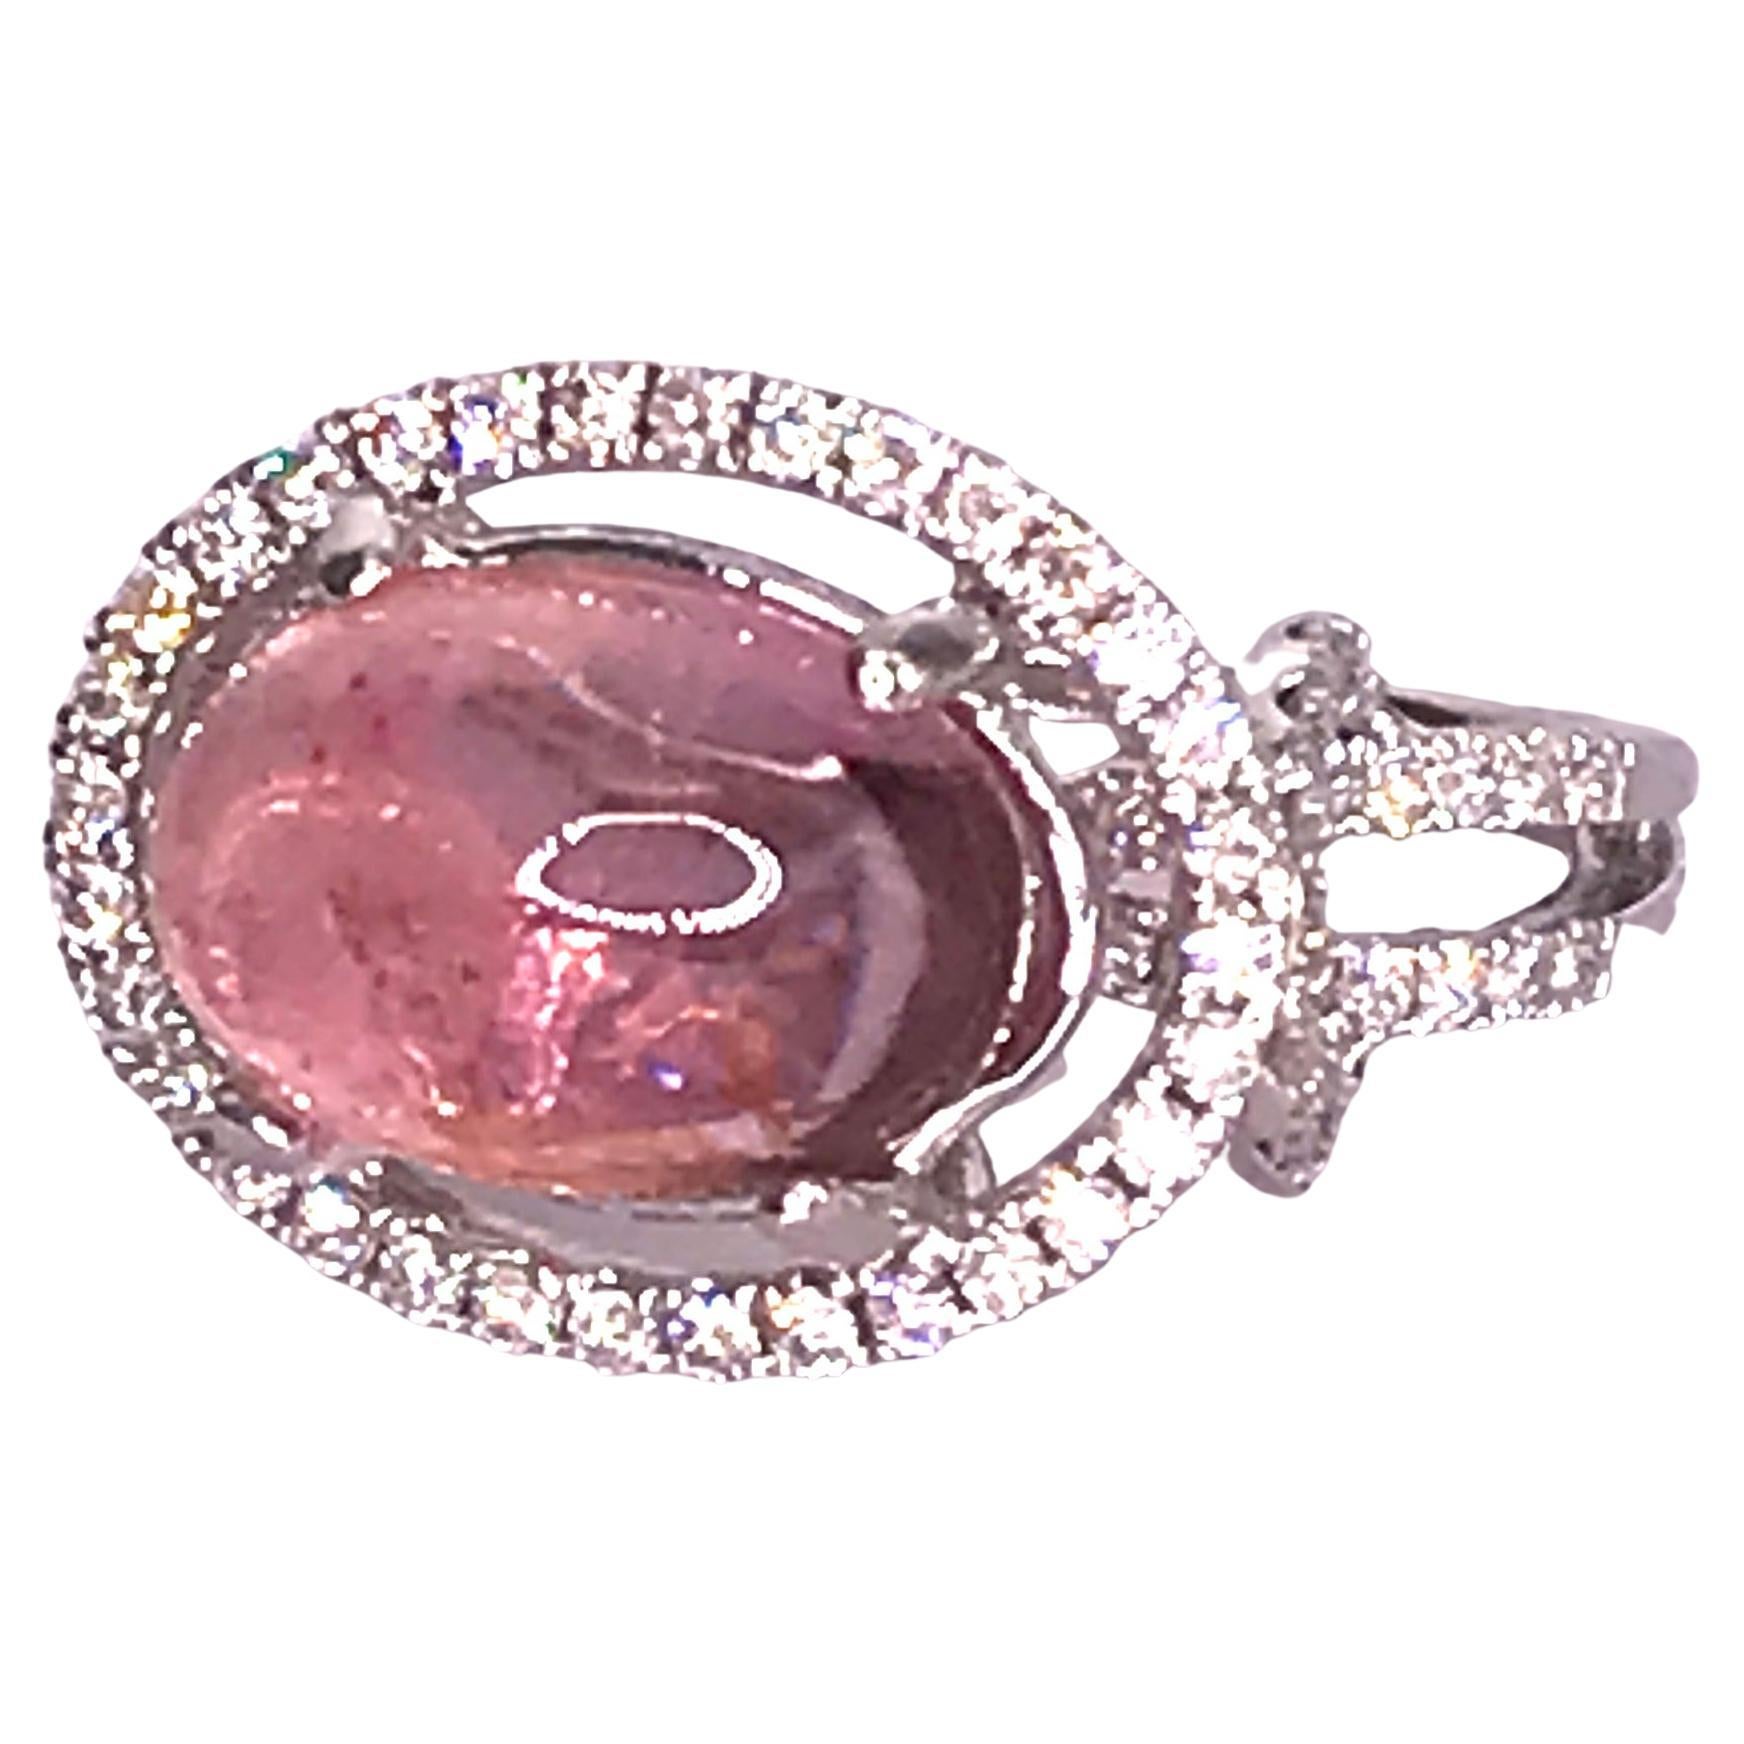 5.9 Carat Pink Tourmaline Cabochon and Diamond Ring For Sale